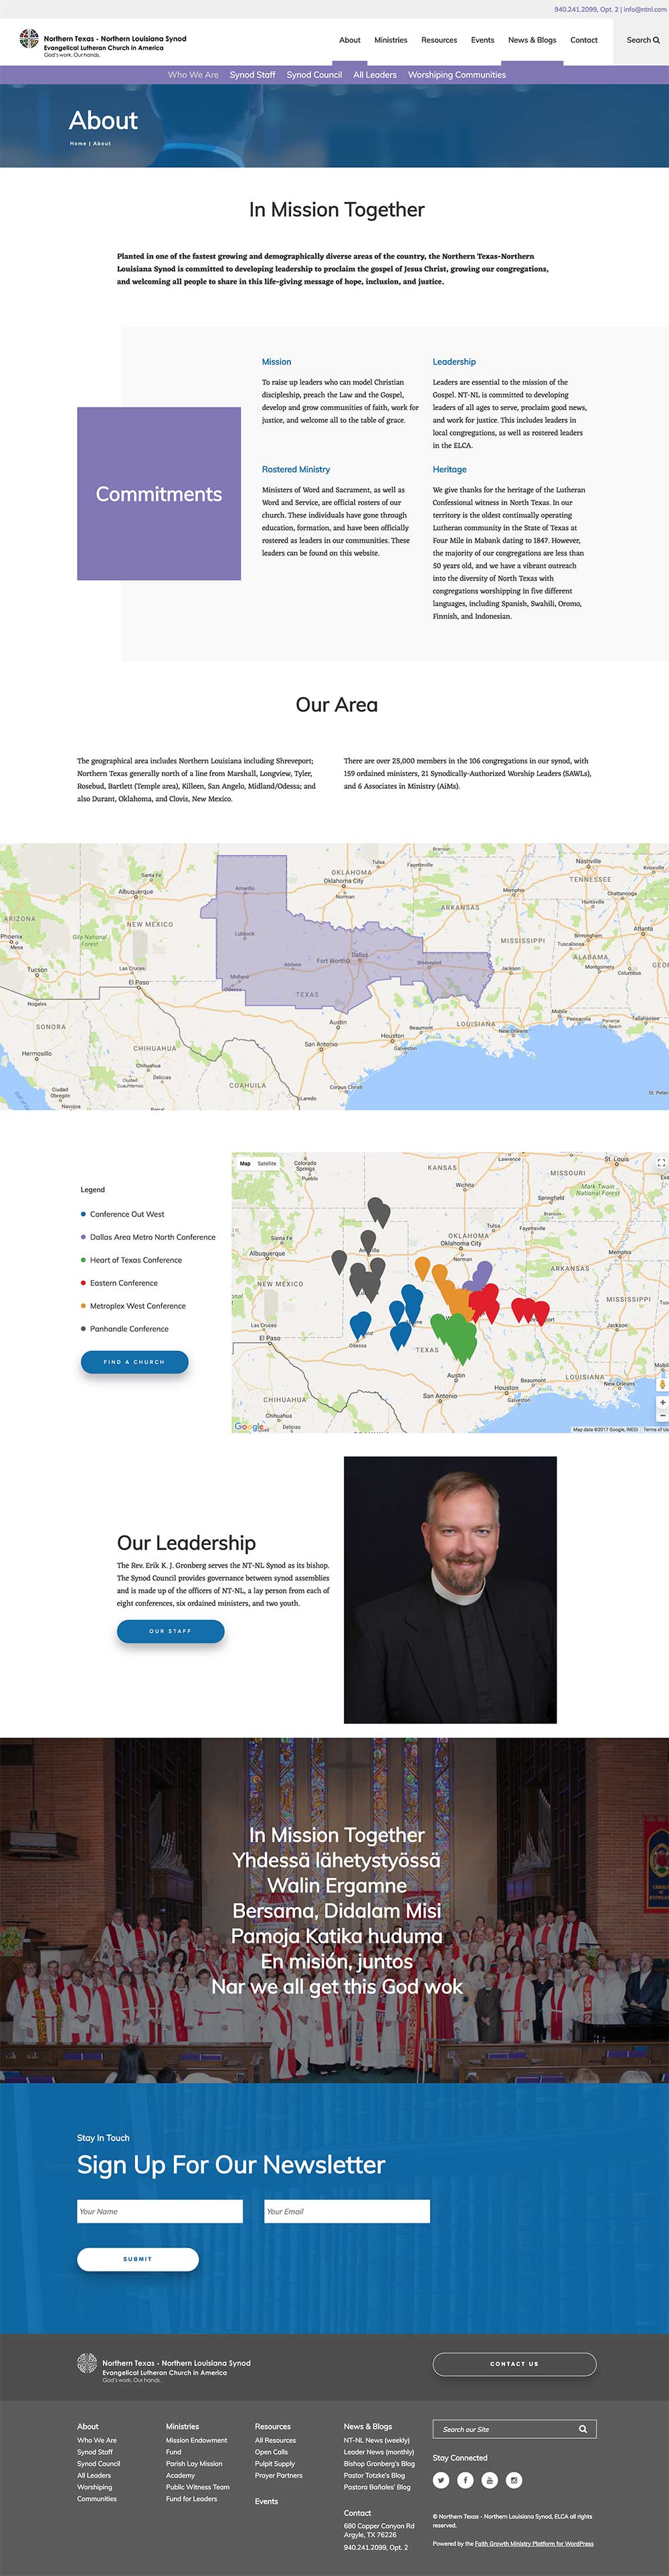 About page for the Northern Texas-Northern Louisiana Synod website